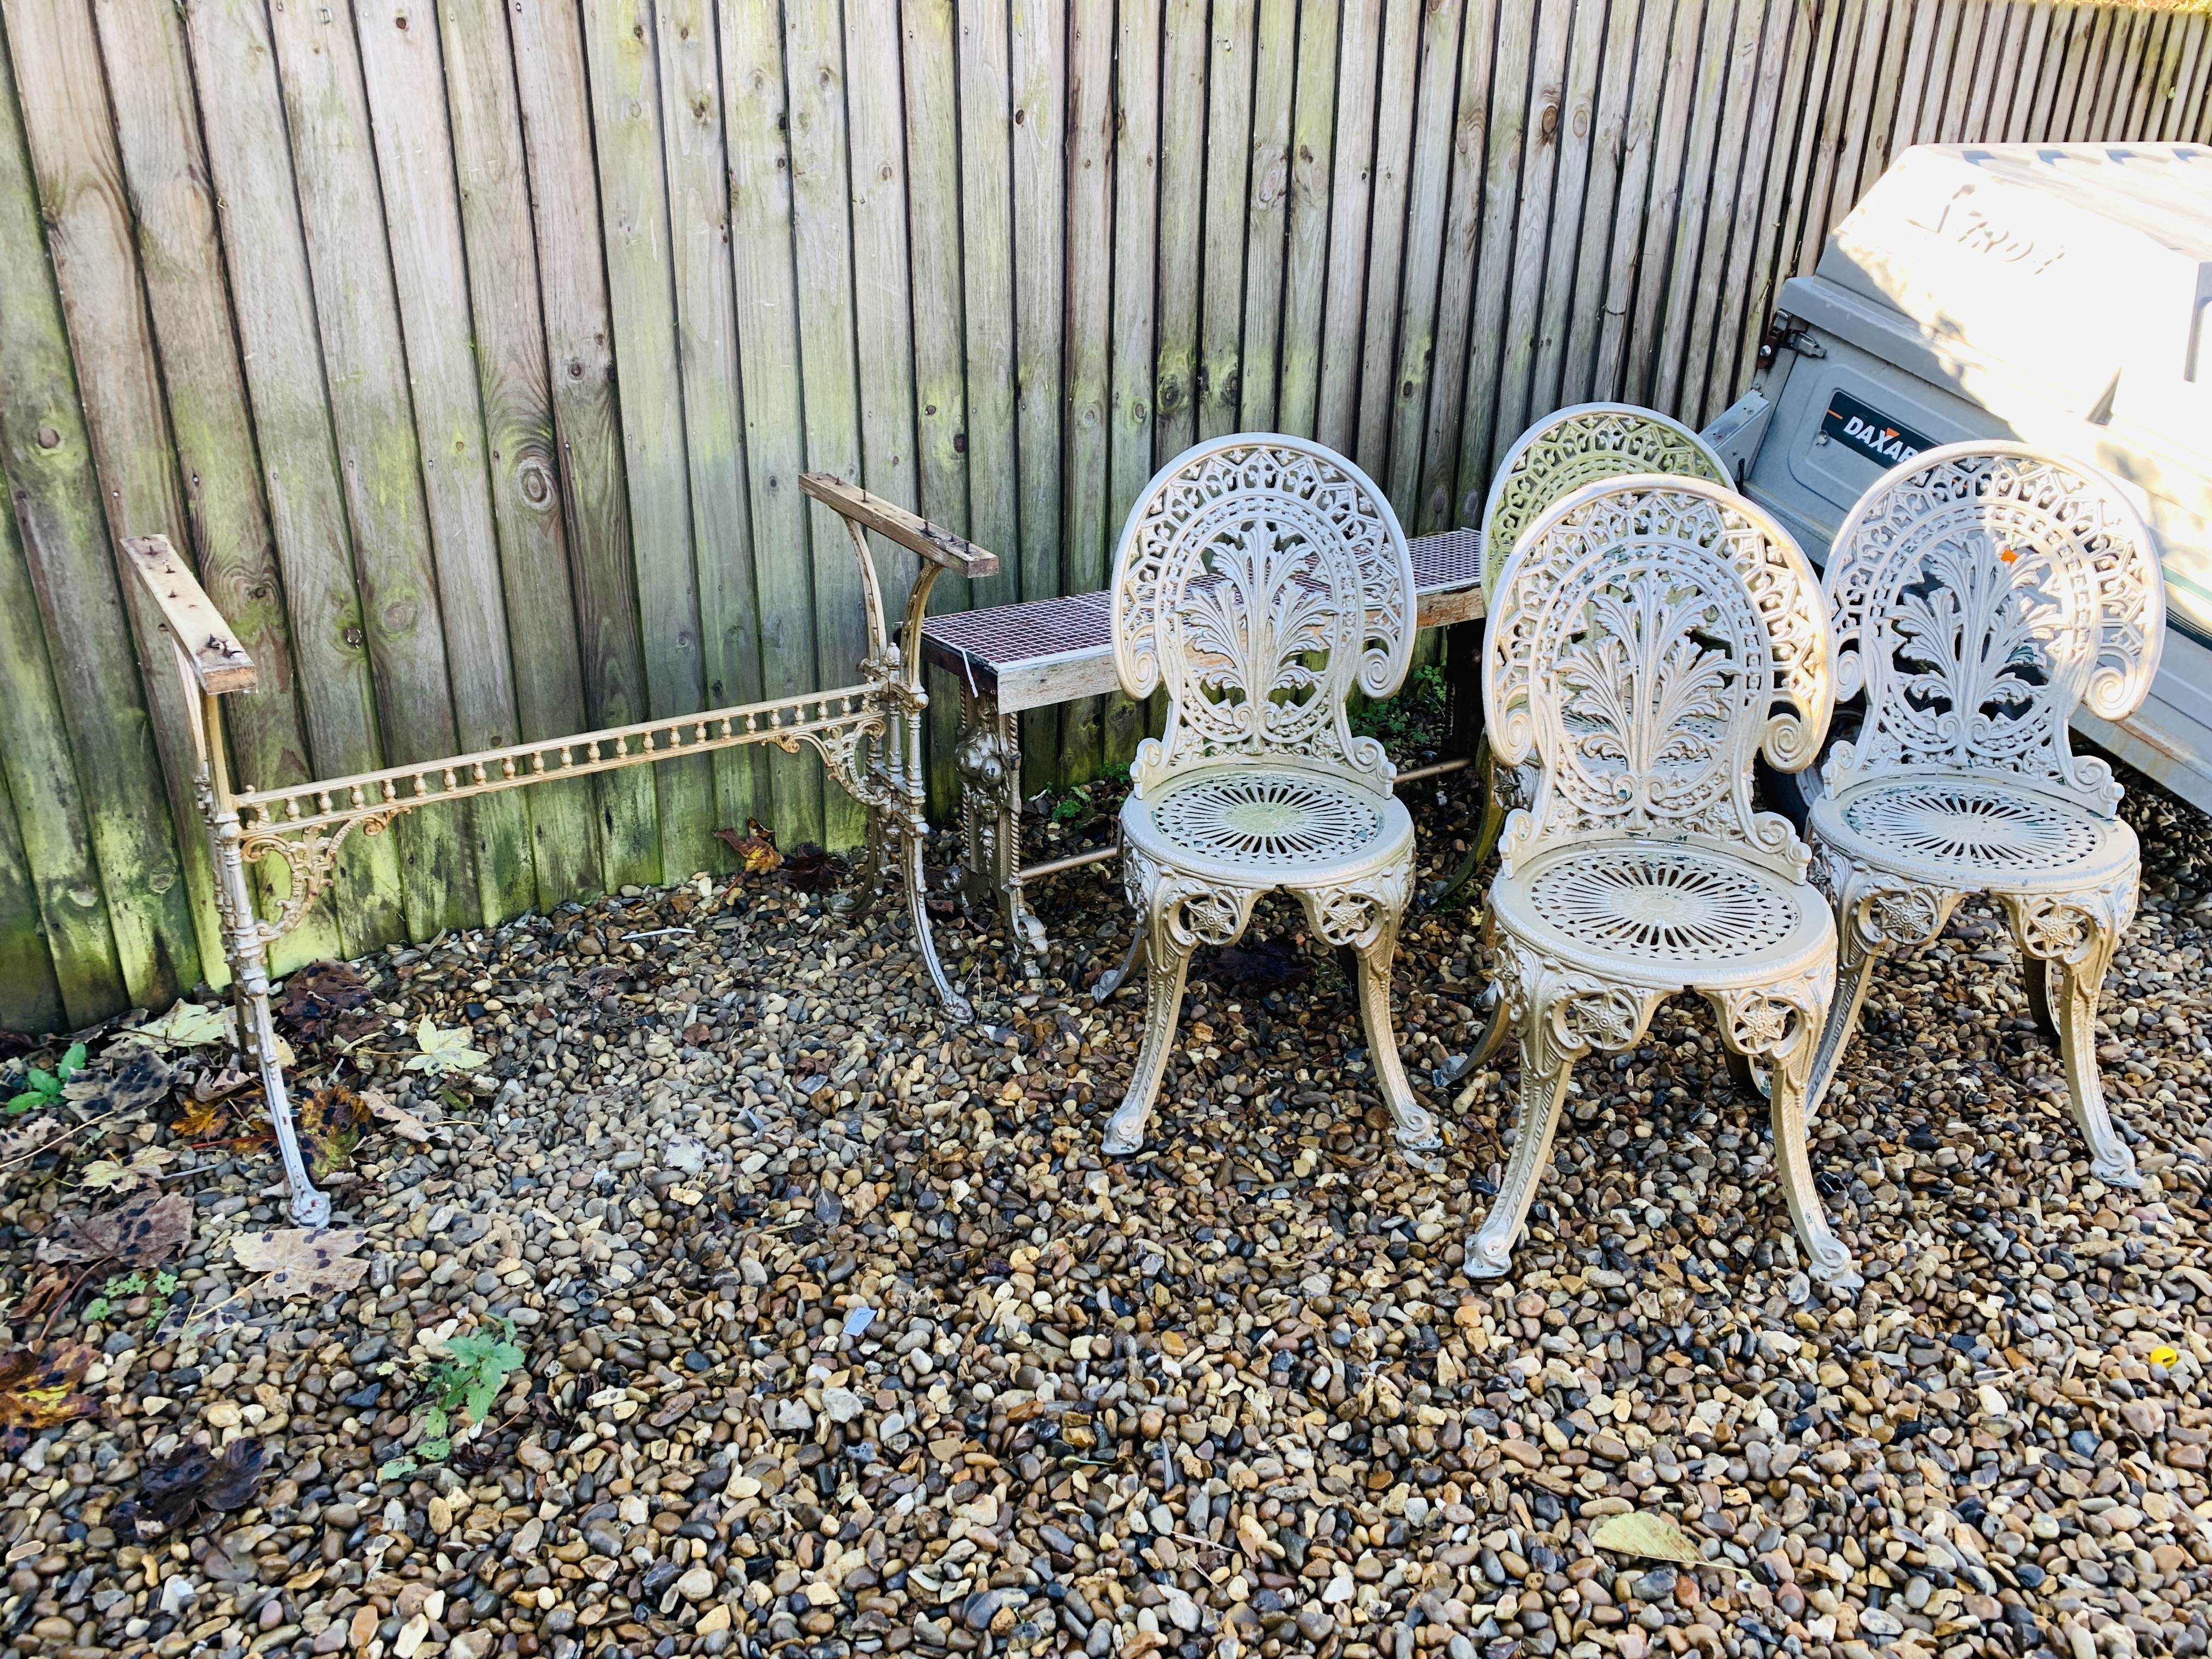 SET OF FOUR DECORATIVE CAST ALUMINIUM GARDEN CHAIRS ALONG WITH DECORATIVE CAST IRON TABLE BASE A/F